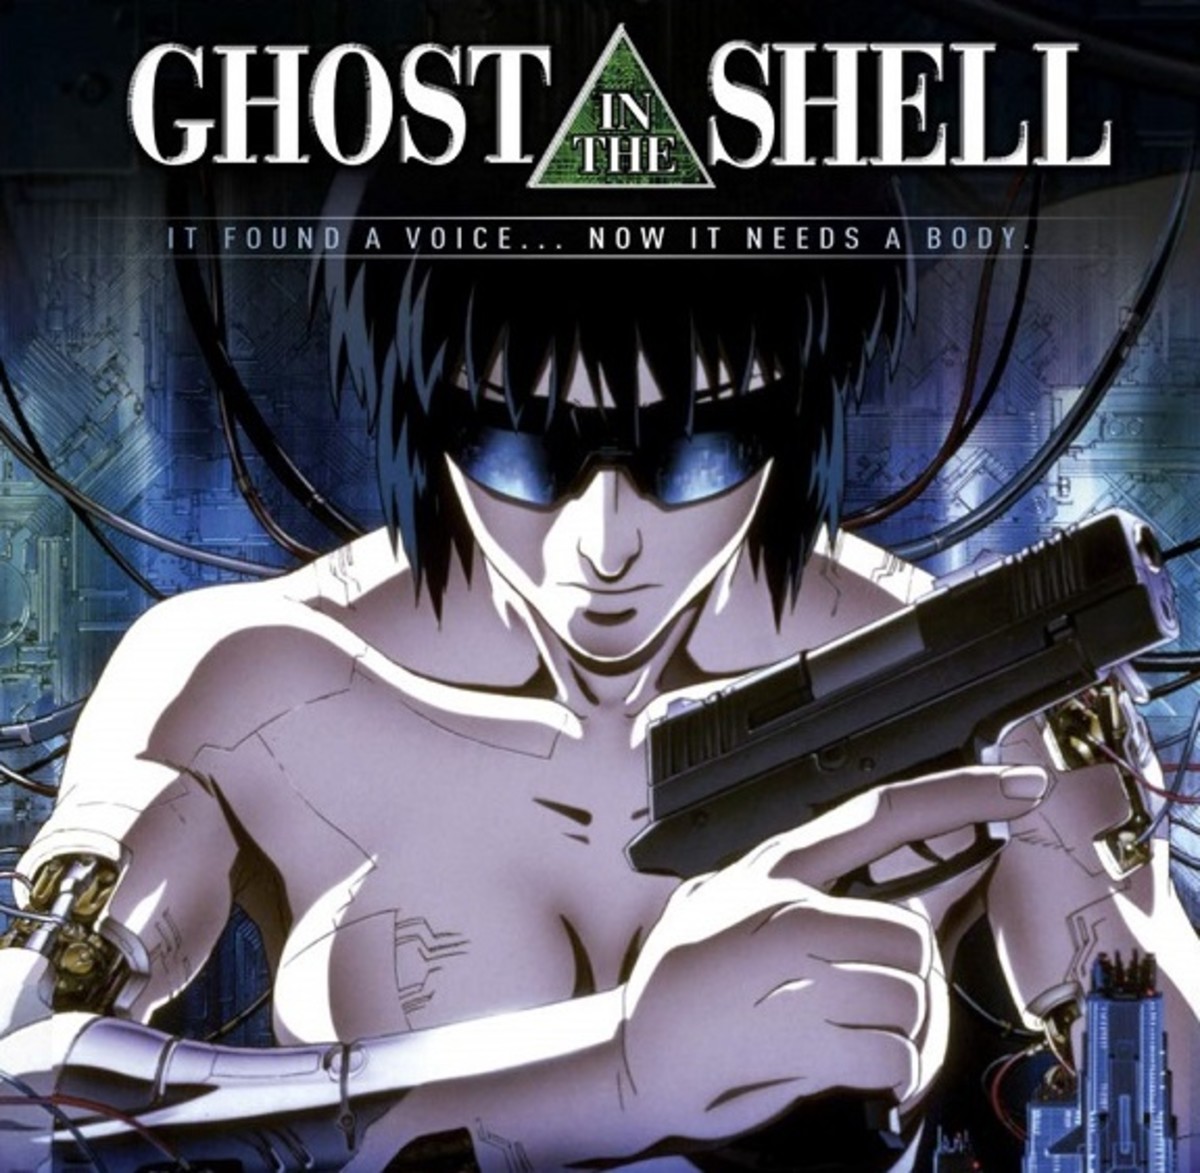 "Ghost in the Shell"